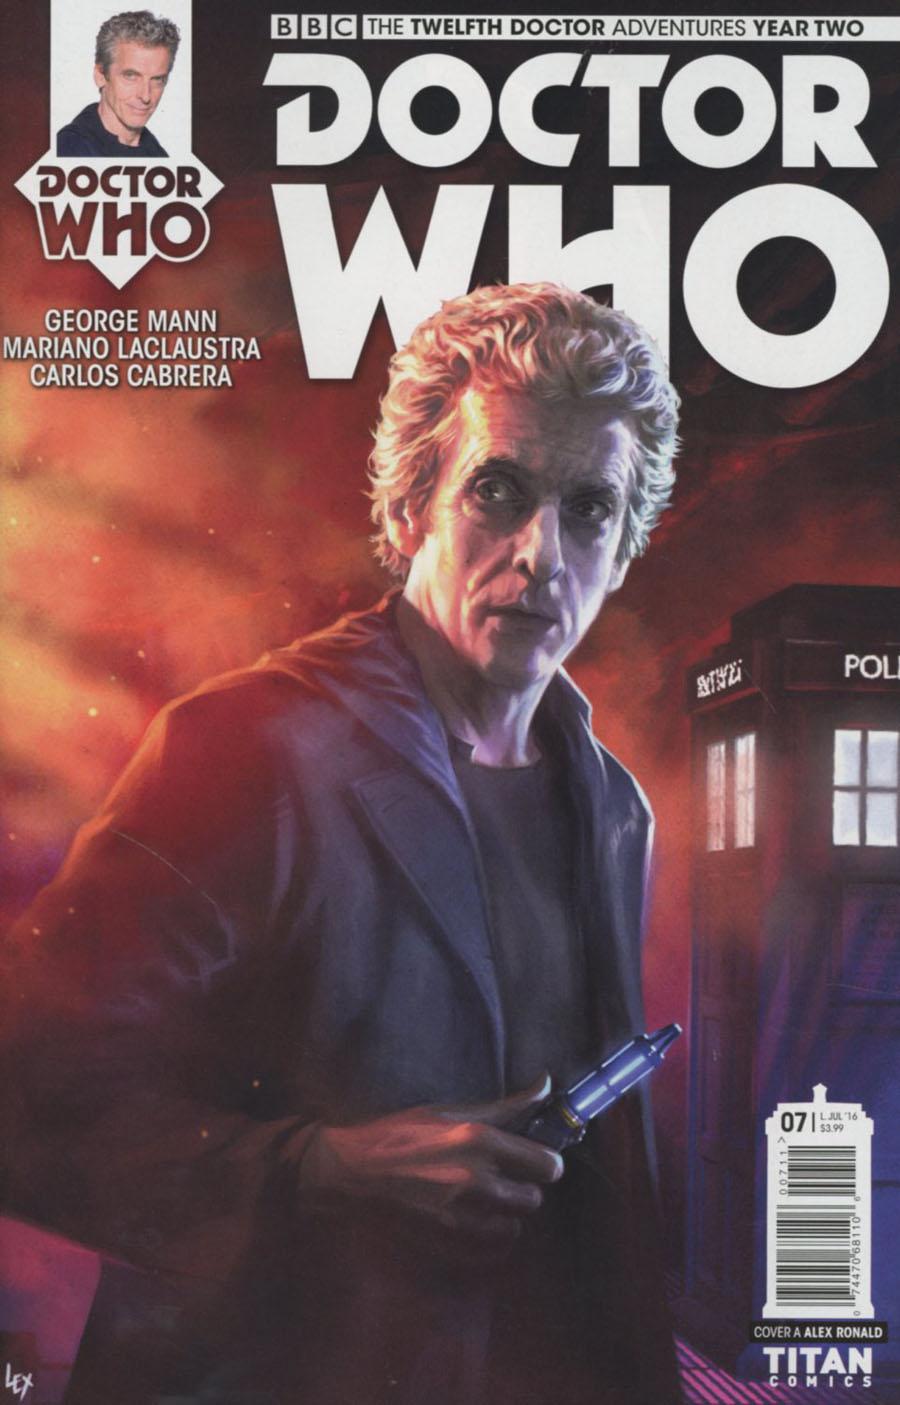 Doctor Who 12th Doctor Year Two Vol. 1 #7